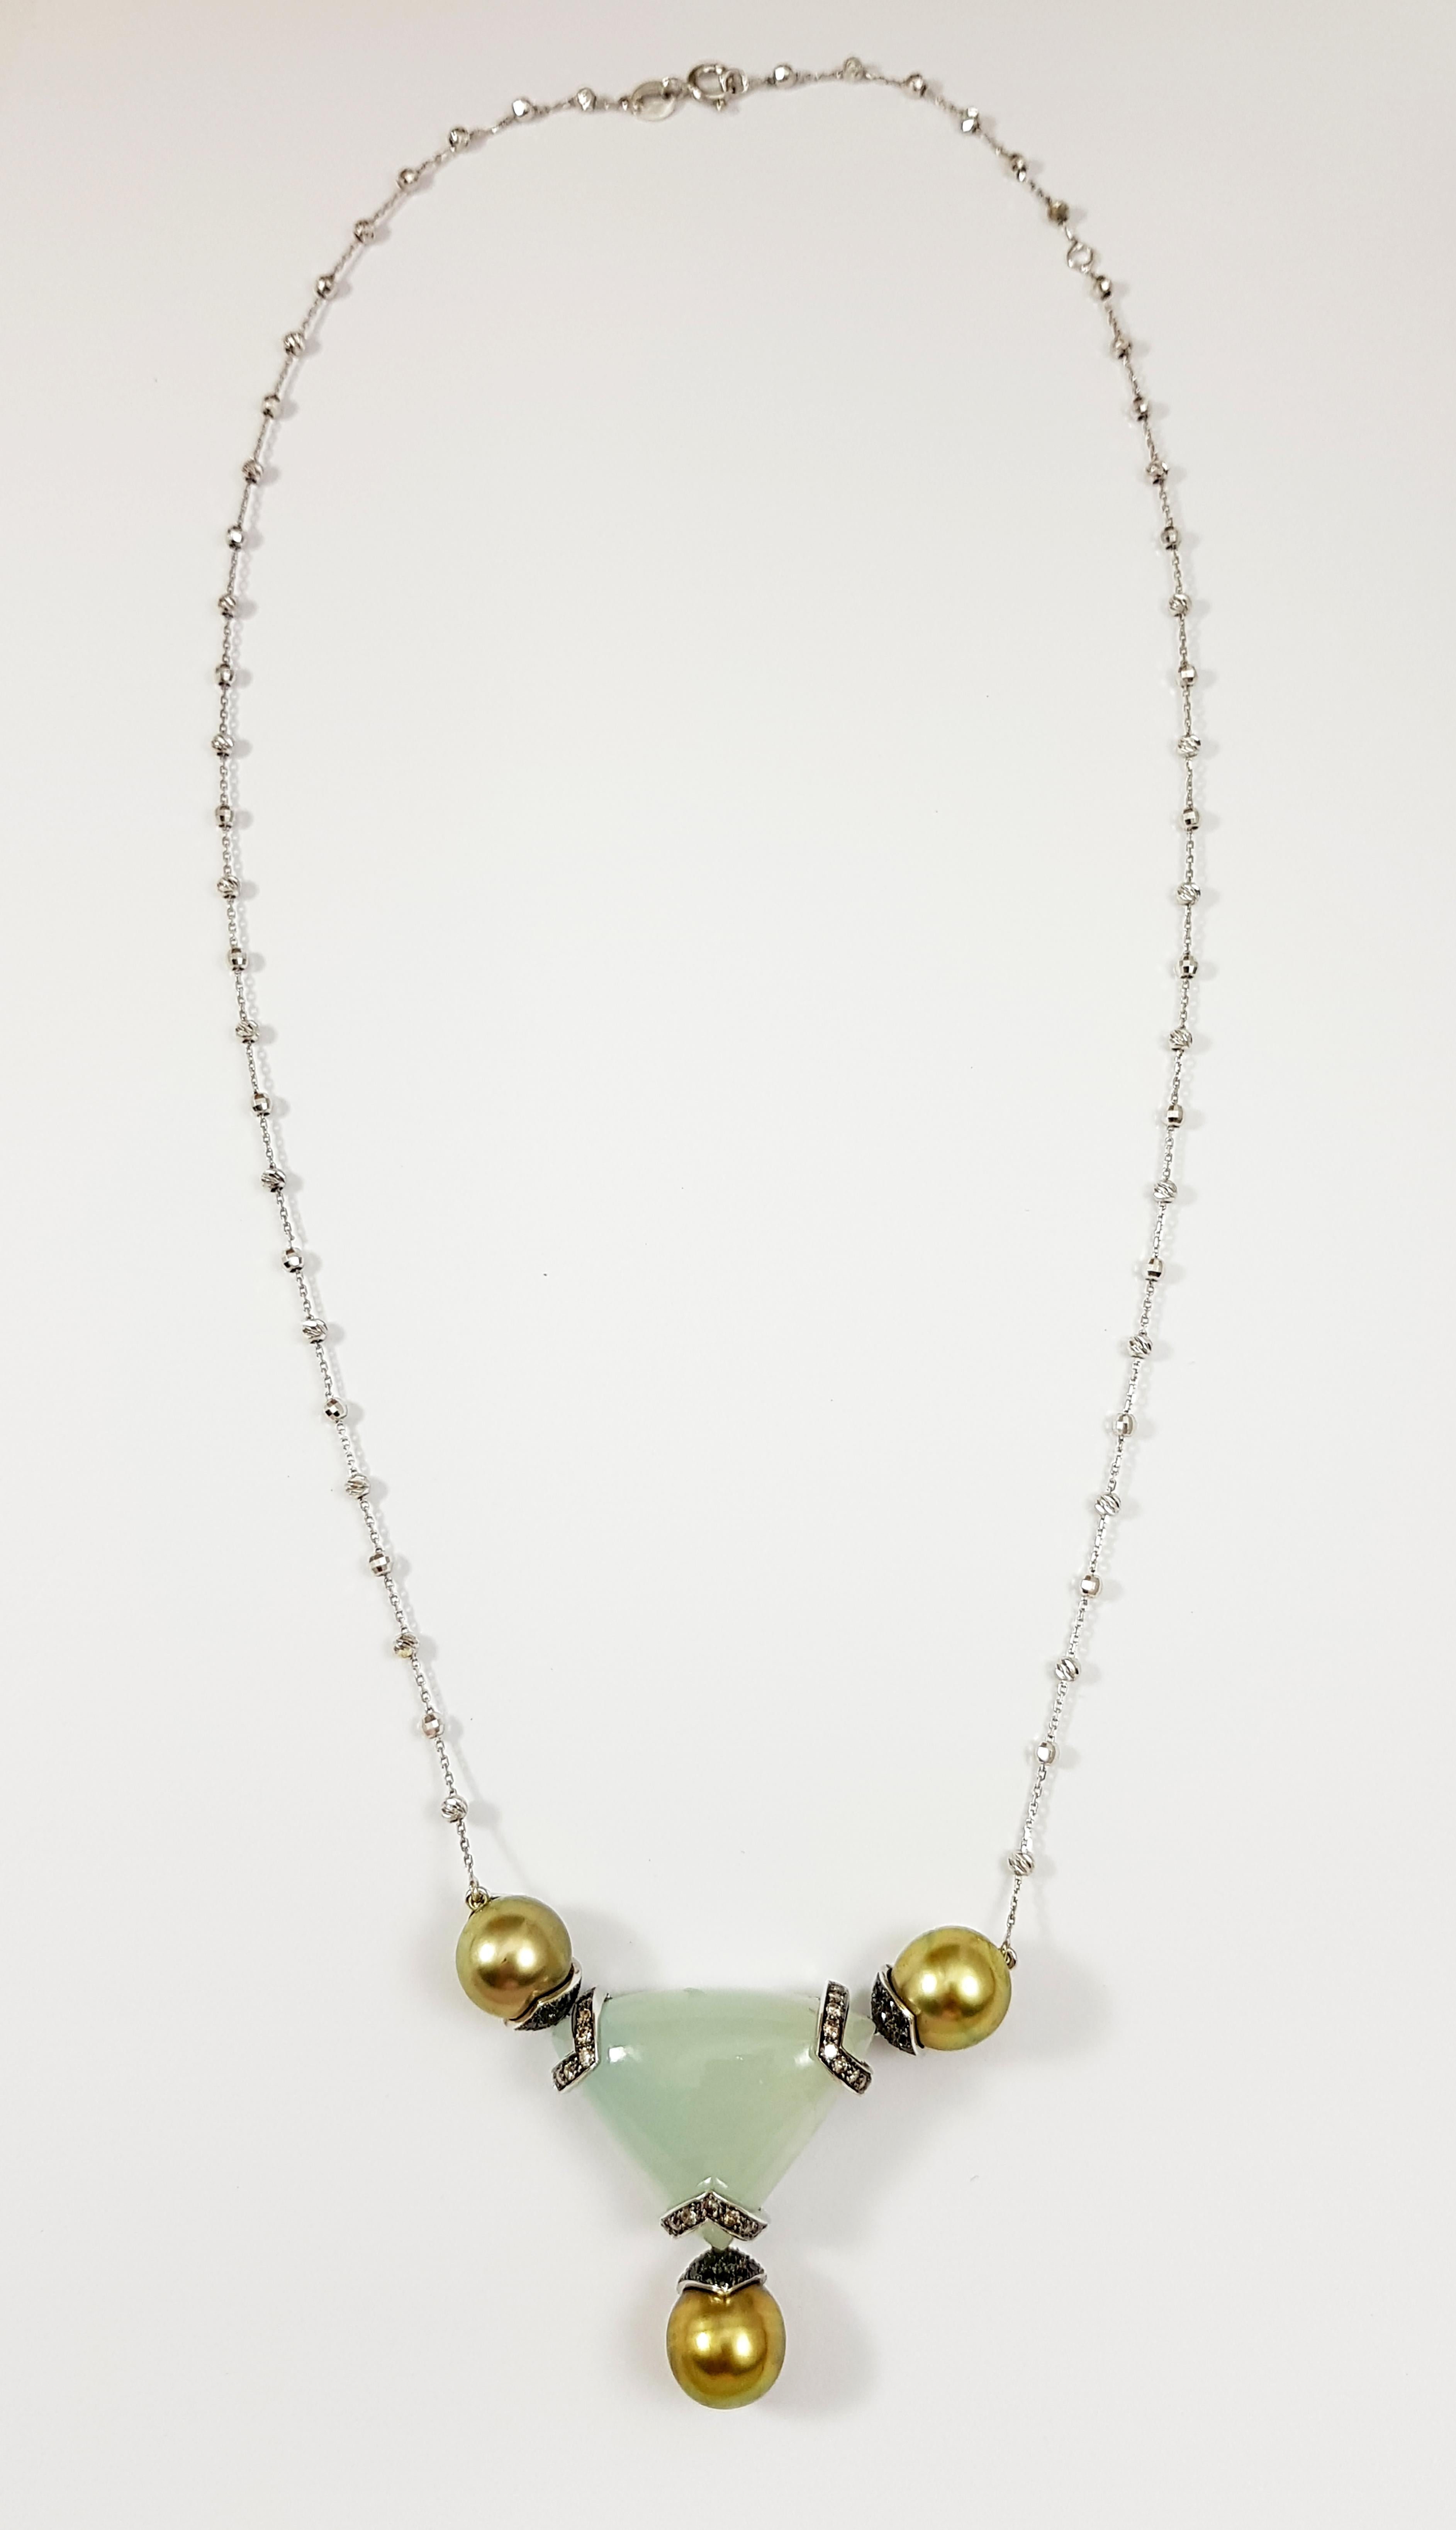 Mixed Cut South Sea Pearl, Aquamarine, Black Diamond Necklace Set in 18 Karat White Gold For Sale